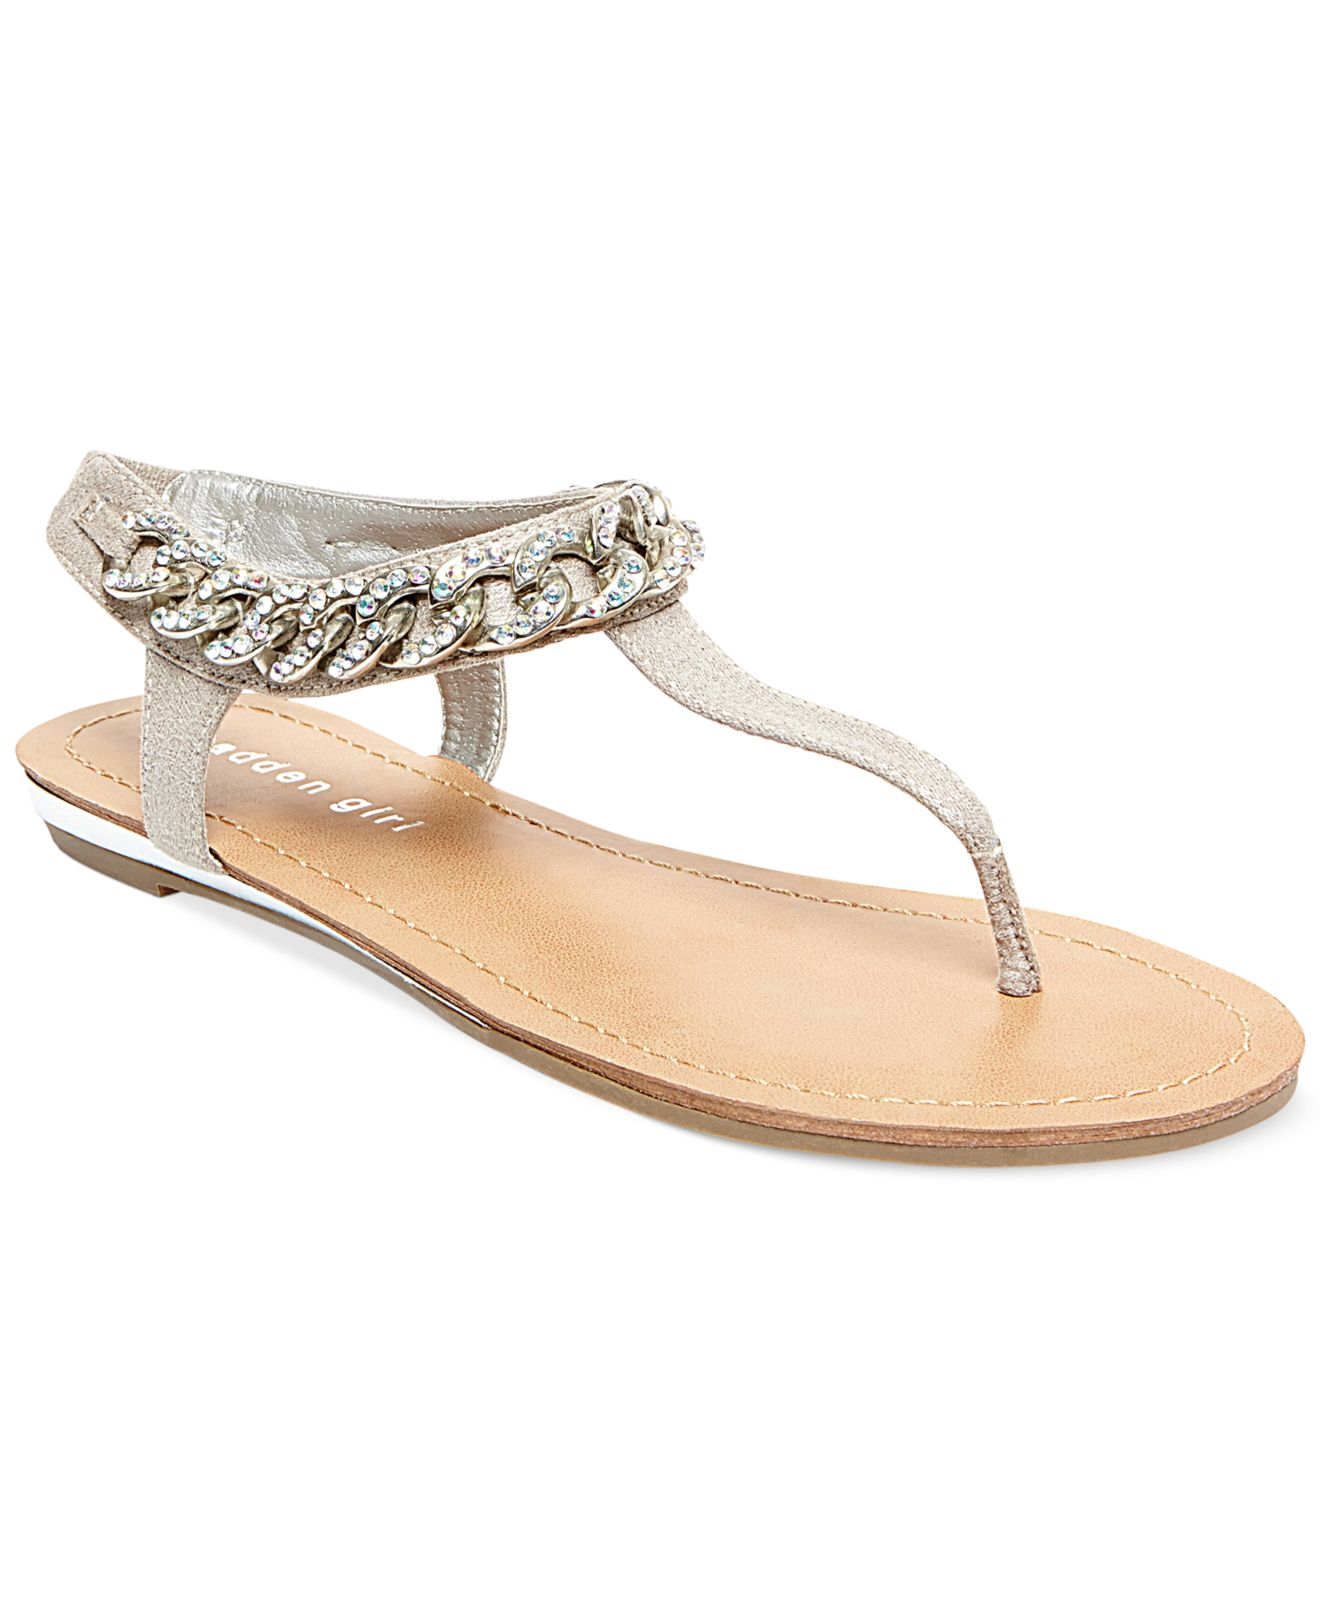 Madden girl Classic T-Strap Chain Flat Thong Sandals in Metallic | Lyst